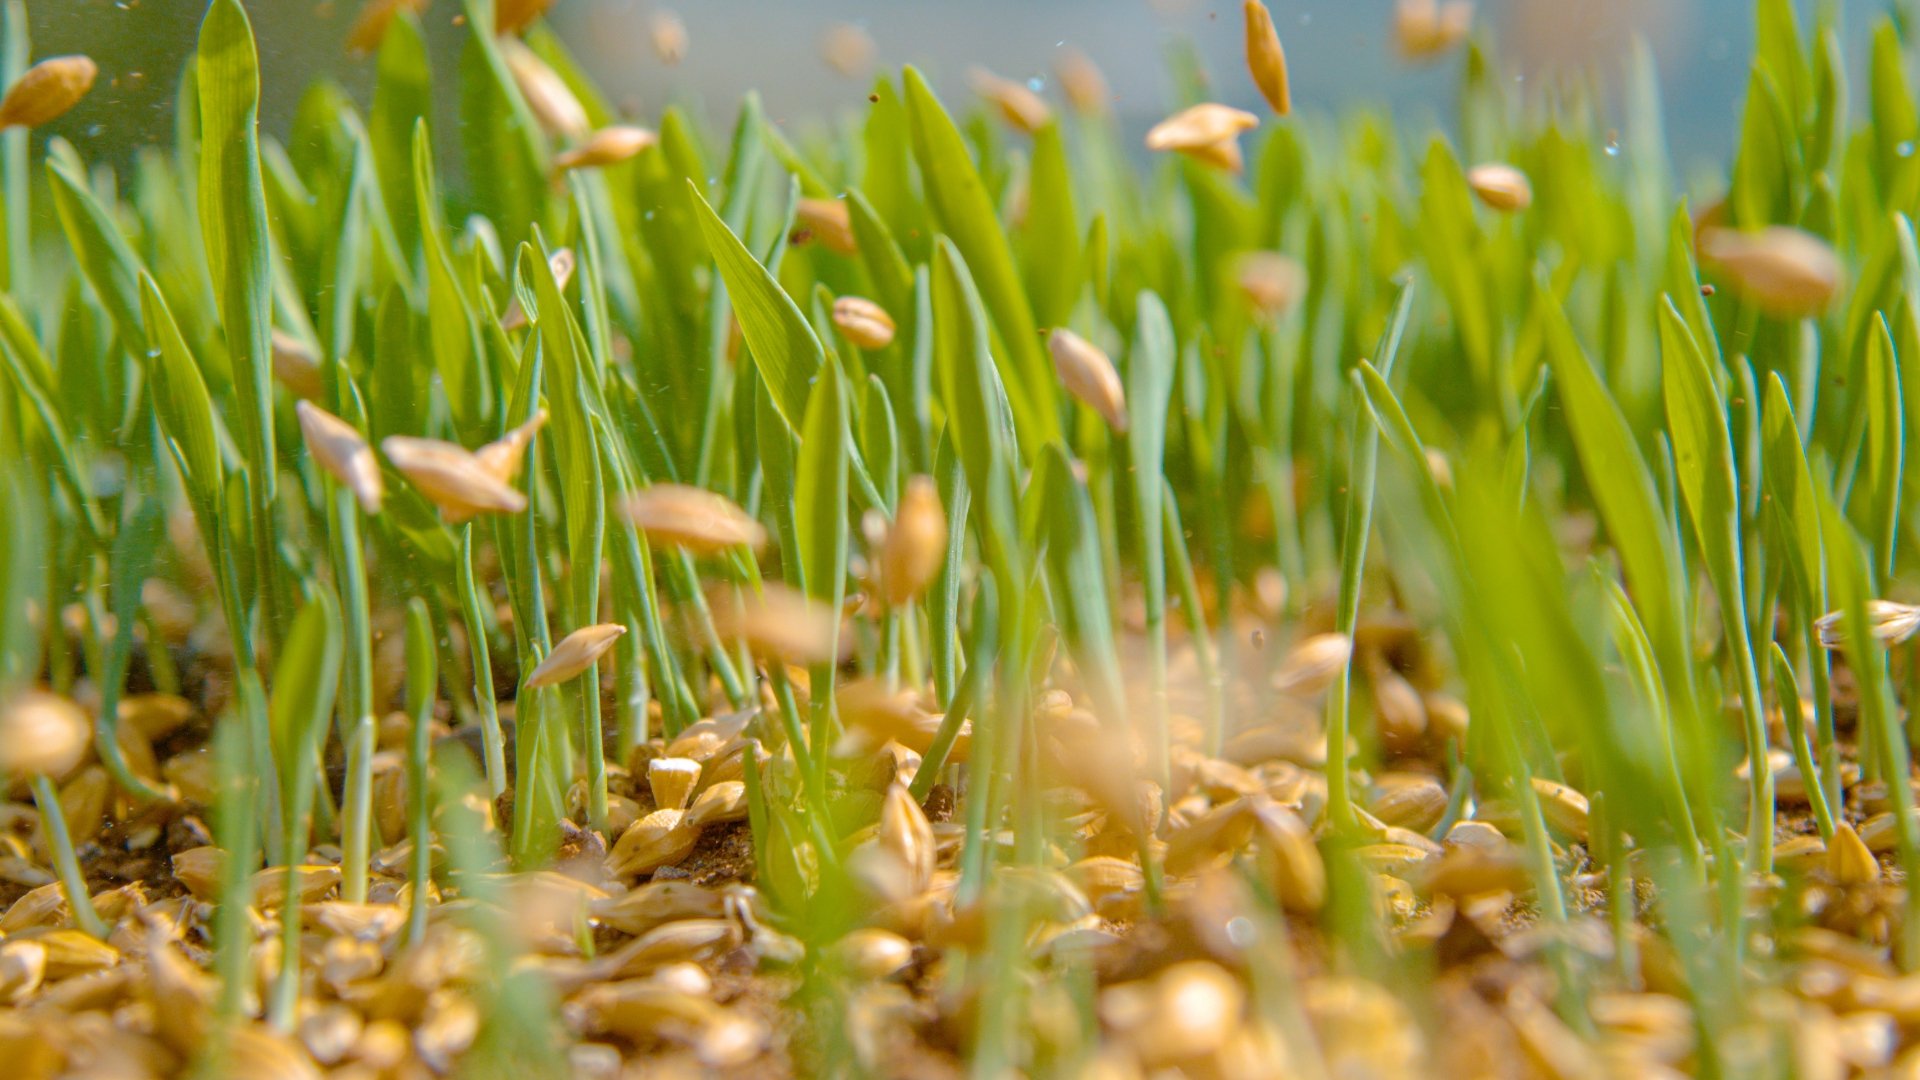 The Best Way To Protect New Grass Seed After Spreading Them on Your Lawn